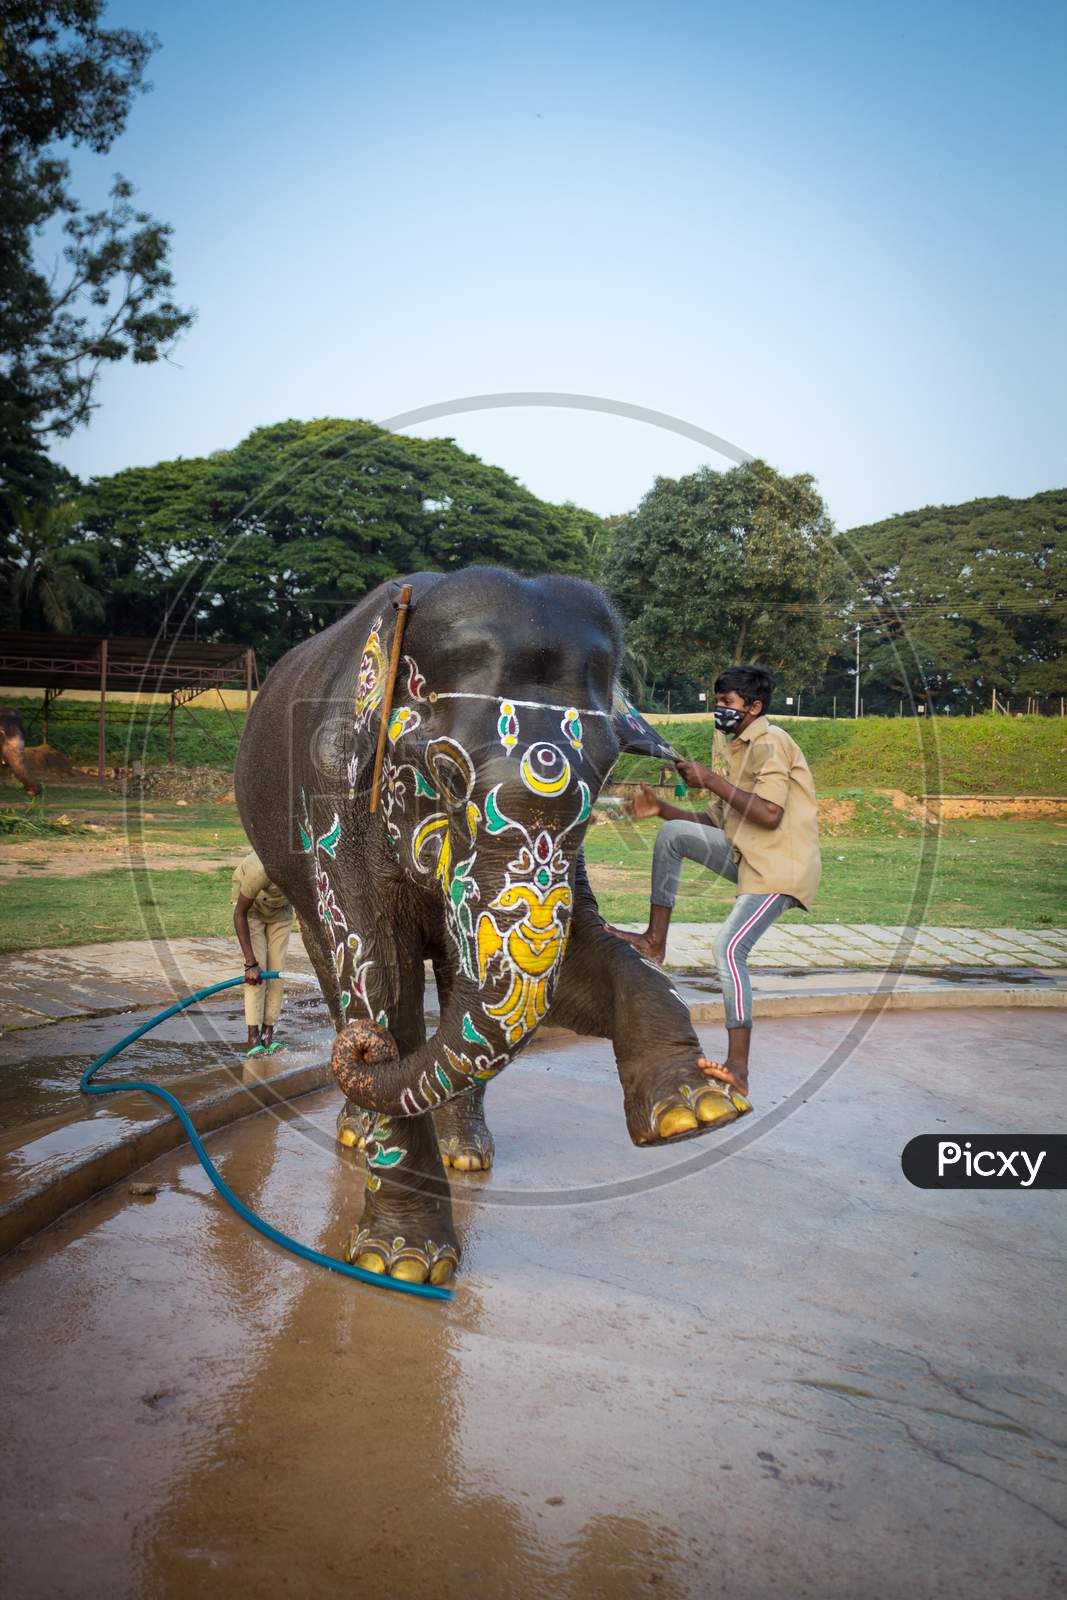 A Mahout is seen climbing on the She Elephant preparing for the Dasara festival Parade at Palace Stable in Mysuru cityscape of Karnataka/India.